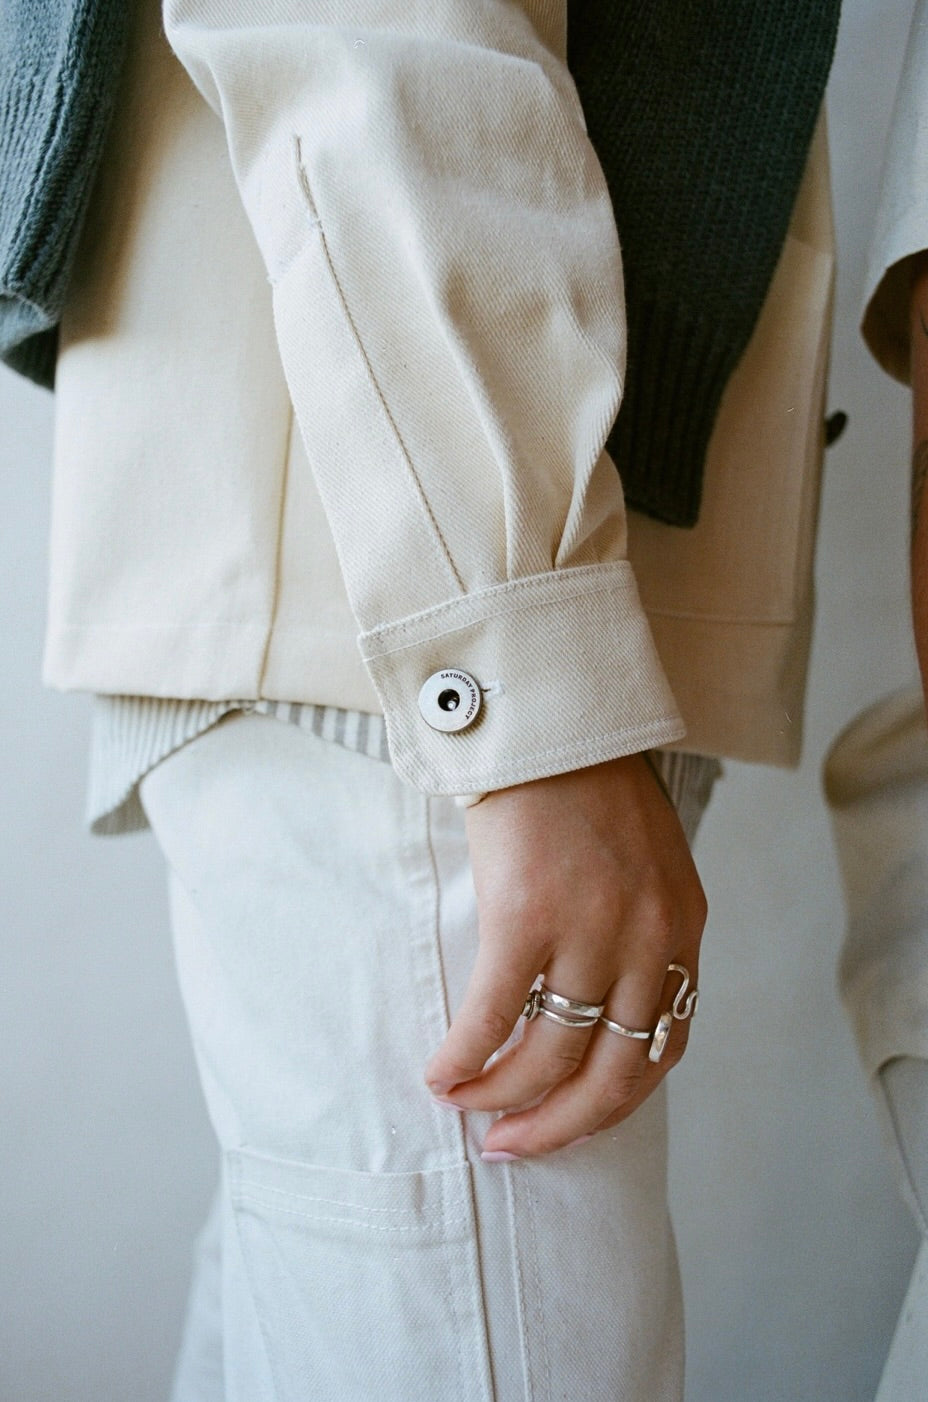 SS24 - Saturday Project - Unisex Jacket  No. 001 - The Chore Coat in Natural  - close -up sleeve 6